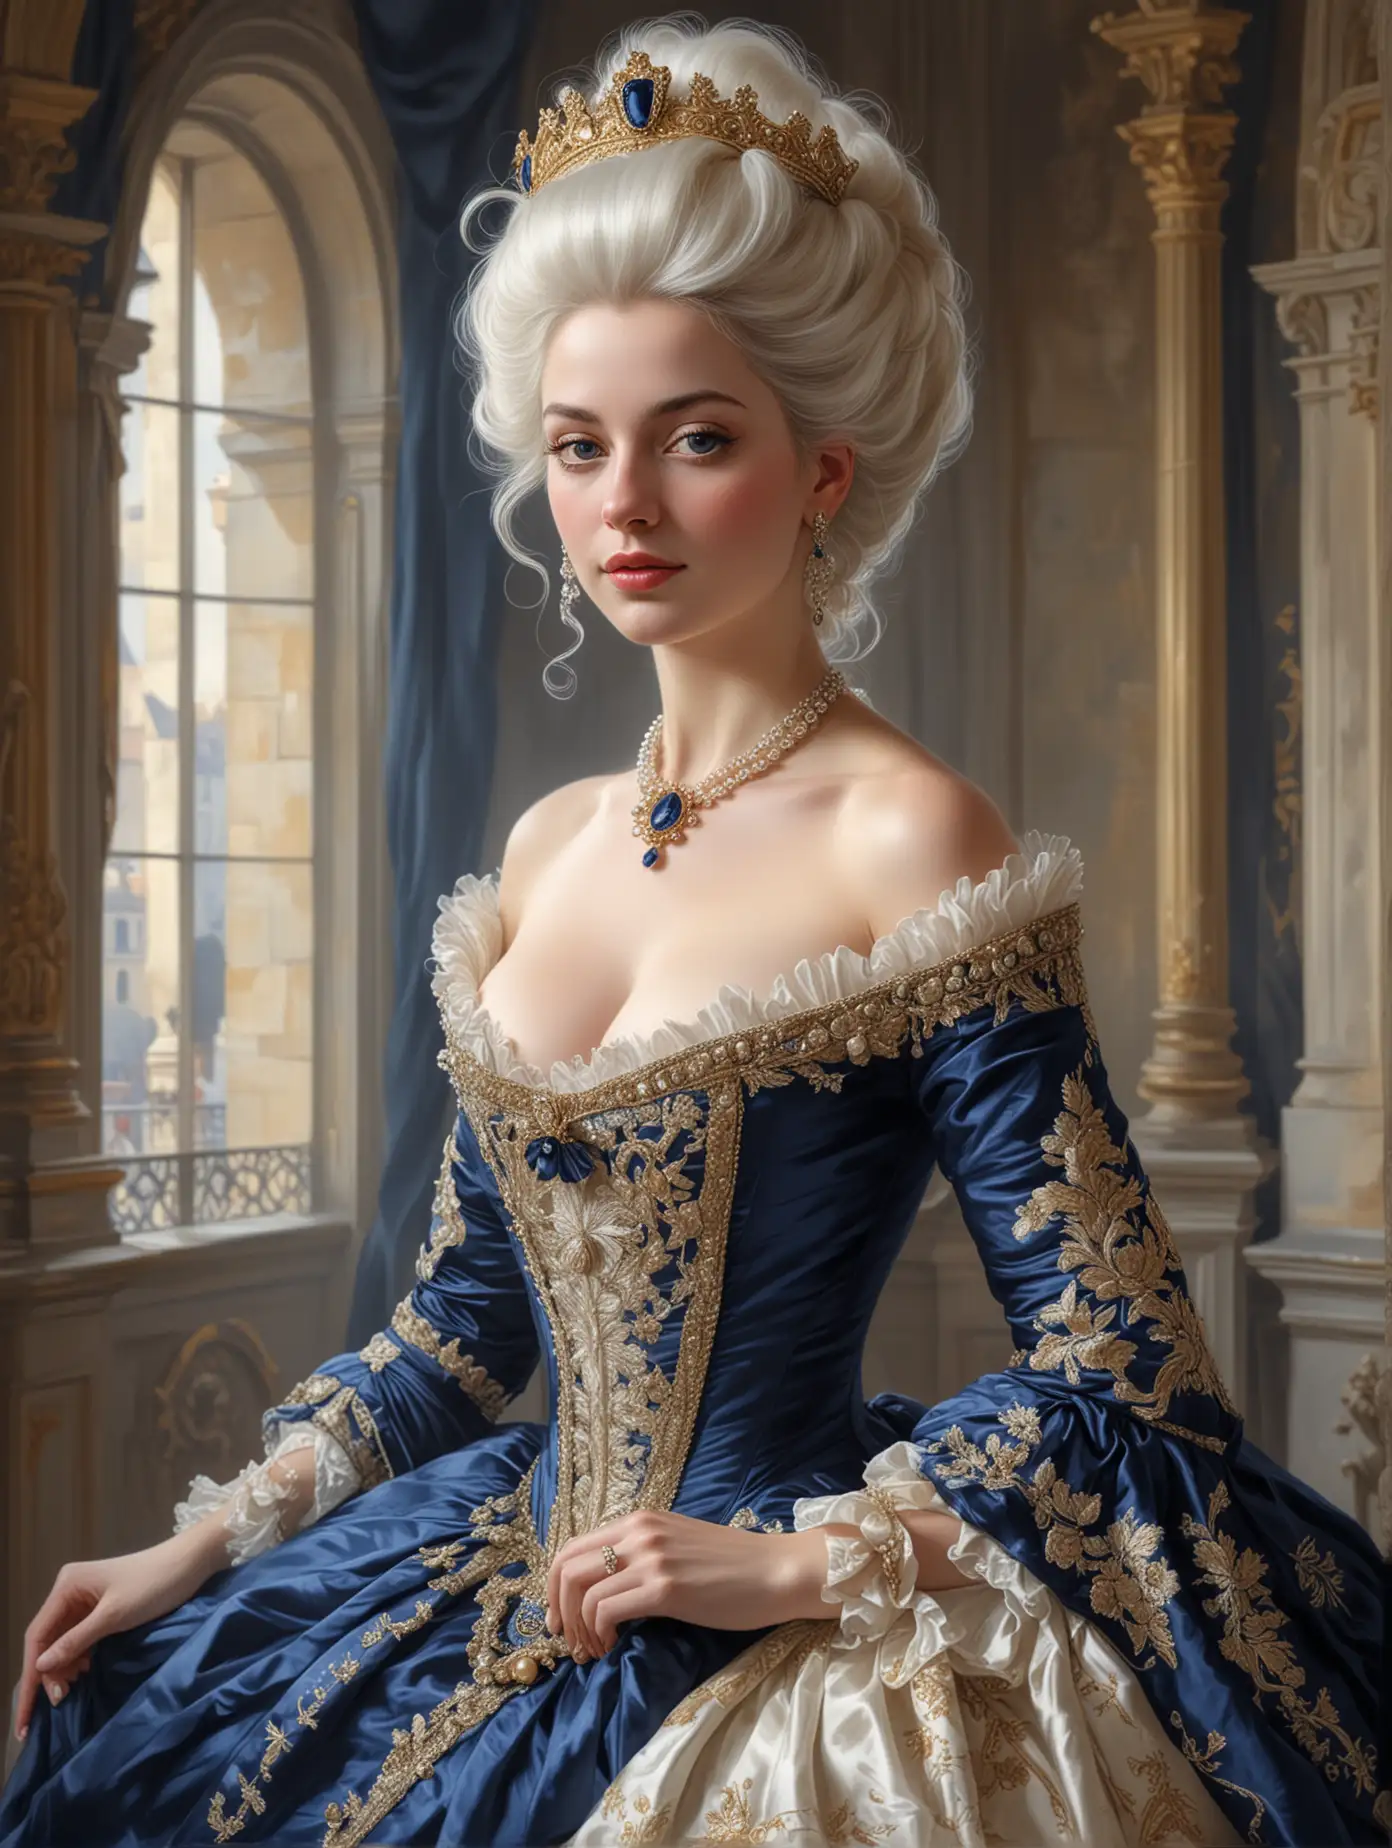 Elegant Queen of France in Navy Blue and Gold Regal Gown Inside Castle